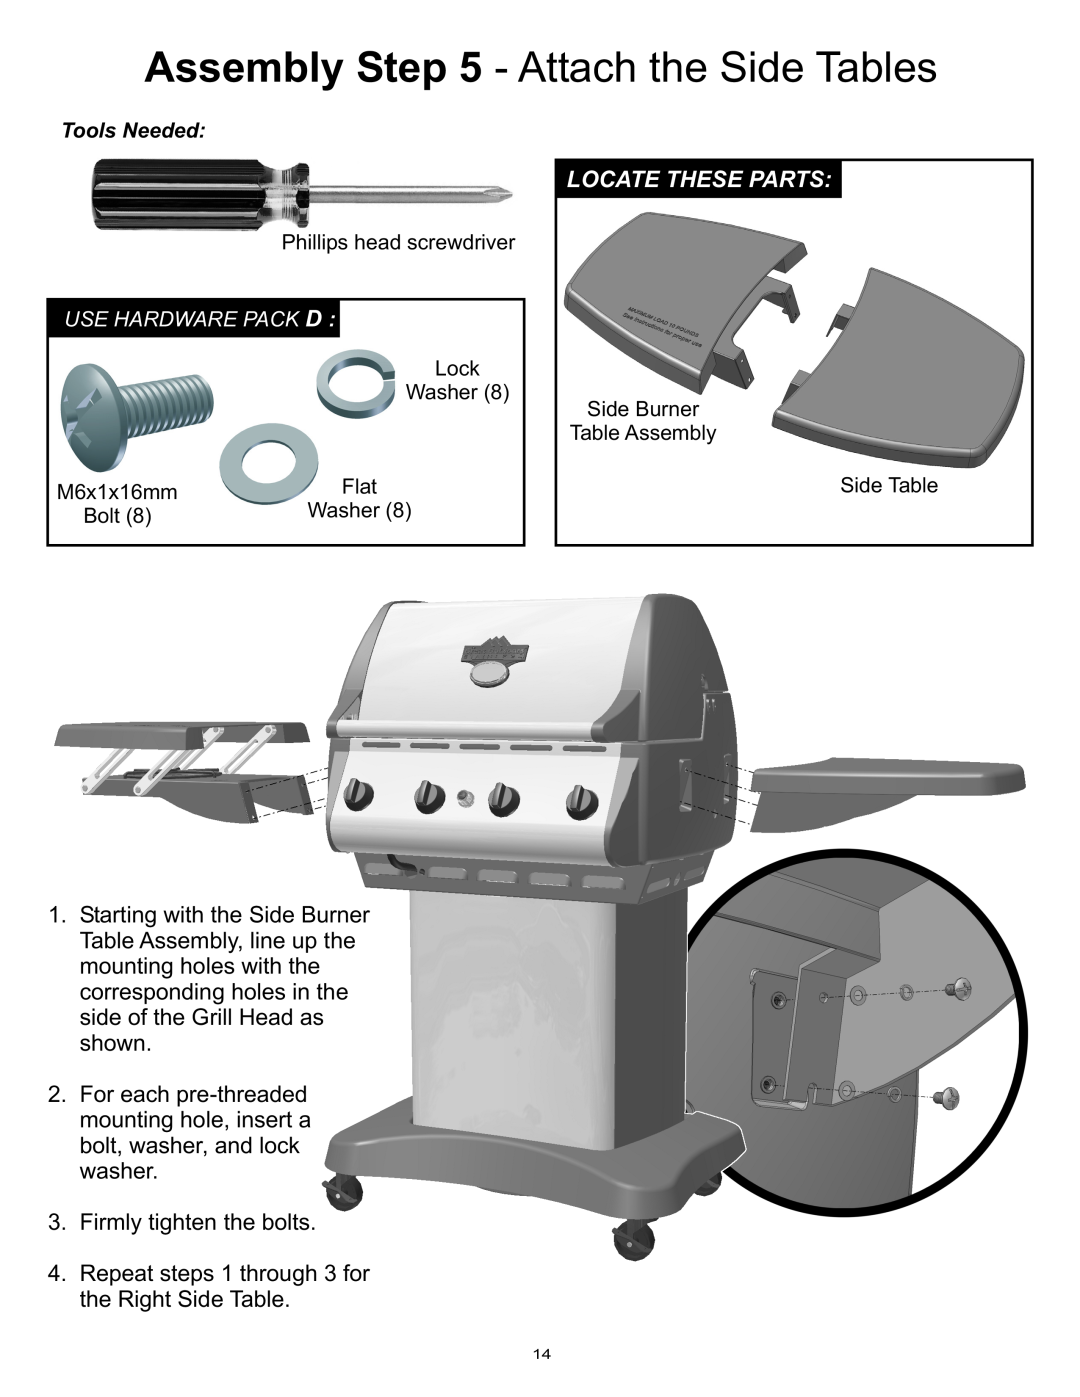 Vermont Casting Gas Grill owner manual Assembly - Attach the Side Tables, Locate These Parts 